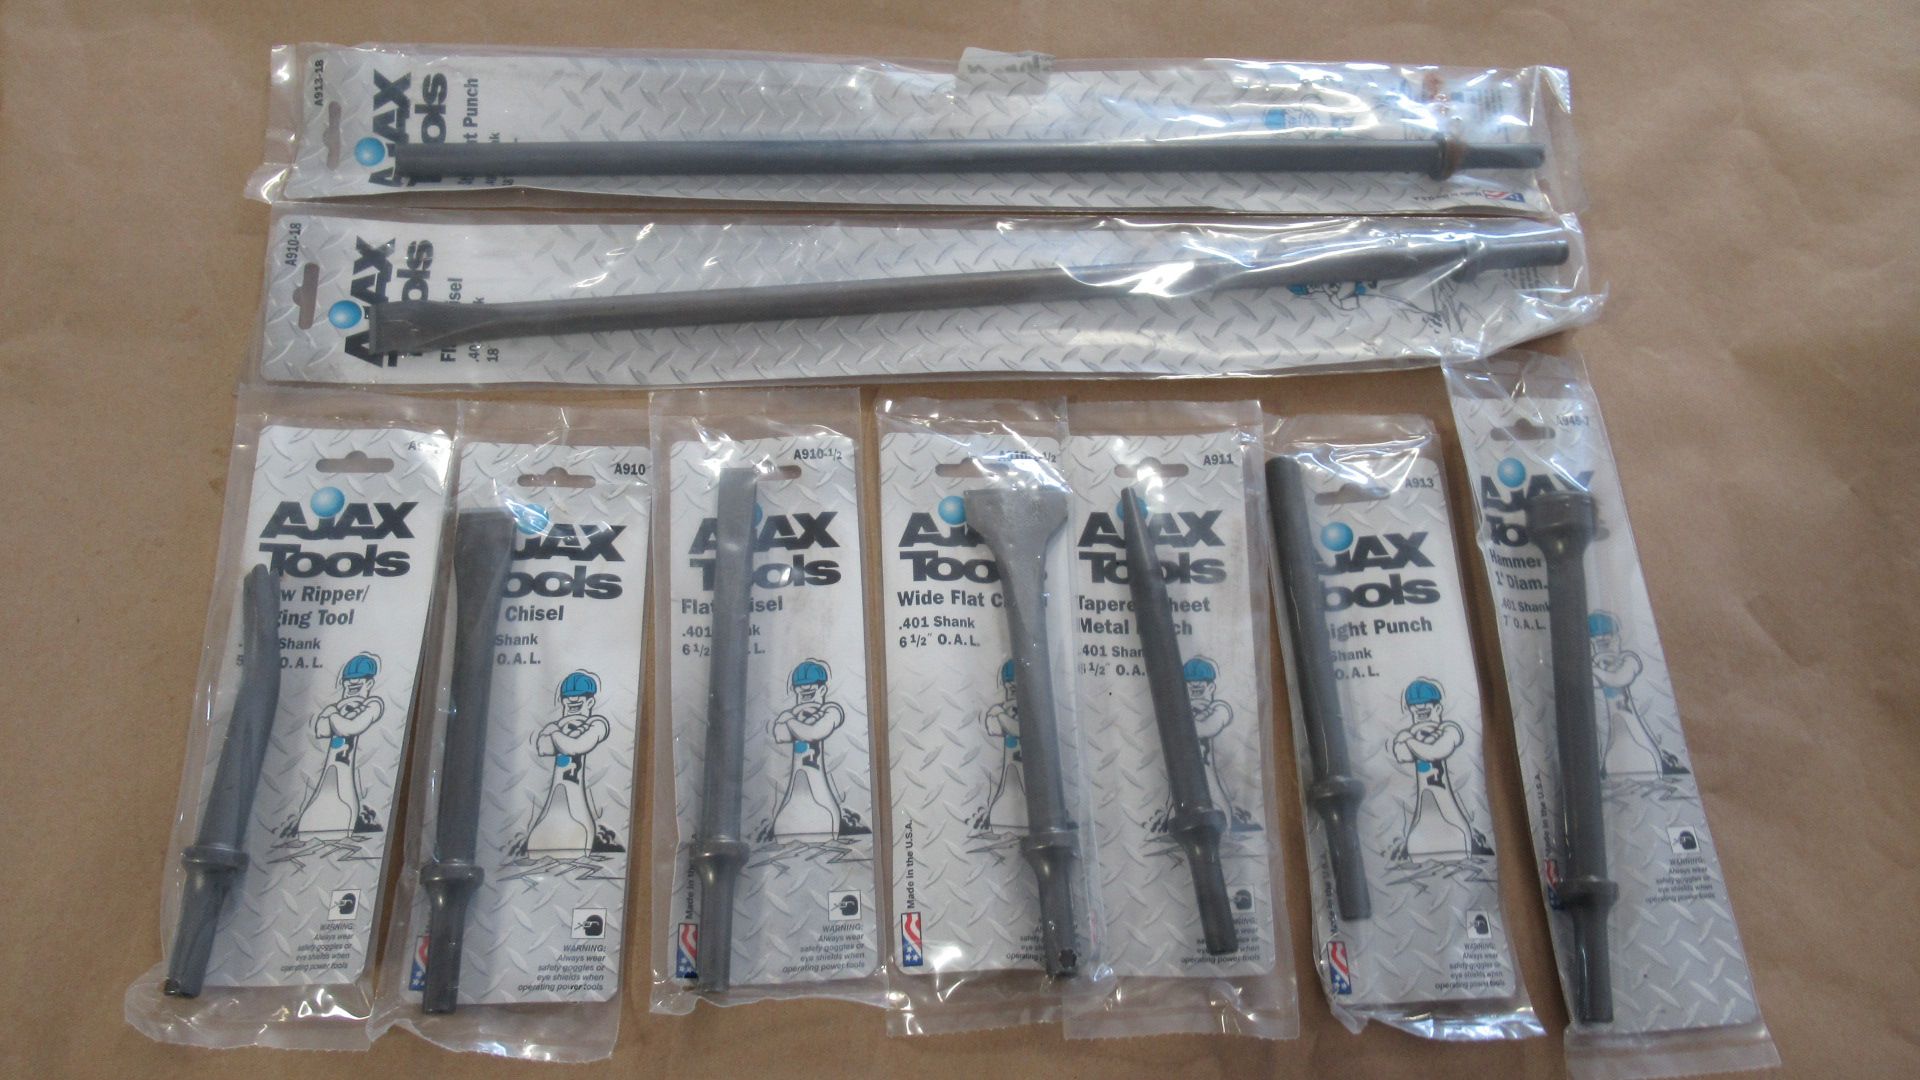 LOT OF 10 CHISELS & PUNCHES ASST AJAX TOOLS